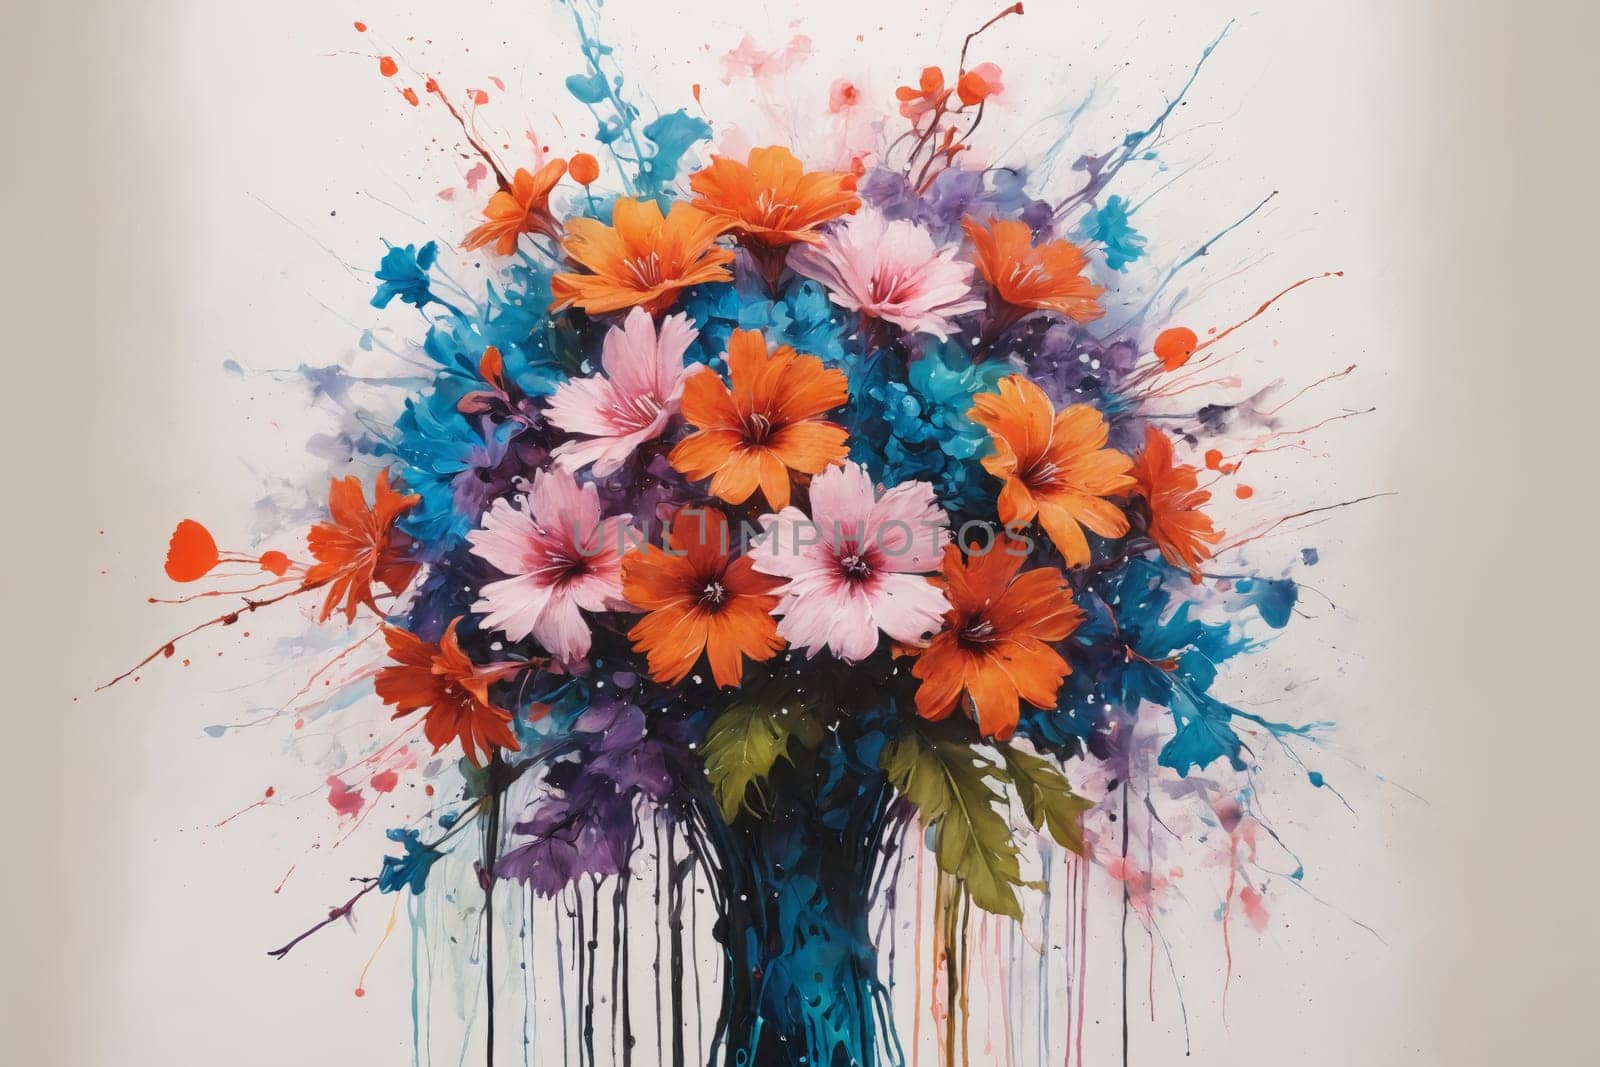 A Rainbow of Blooms in Abstract Artistry by Andre1ns